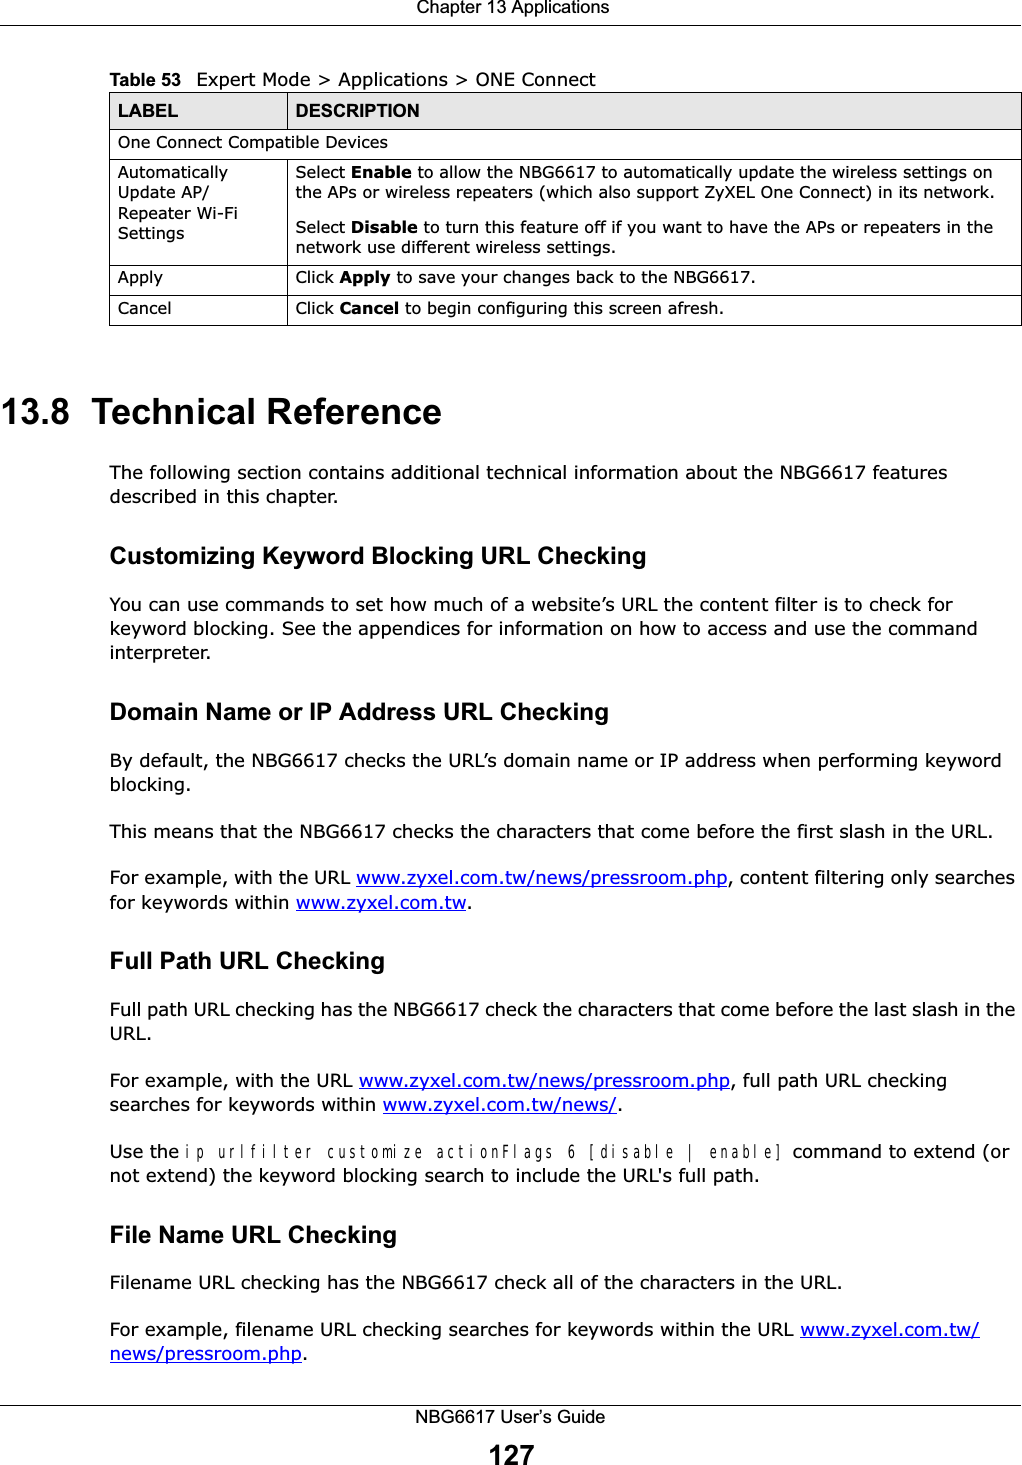  Chapter 13 ApplicationsNBG6617 User’s Guide12713.8  Technical ReferenceThe following section contains additional technical information about the NBG6617 features described in this chapter.Customizing Keyword Blocking URL CheckingYou can use commands to set how much of a website’s URL the content filter is to check for keyword blocking. See the appendices for information on how to access and use the command interpreter.Domain Name or IP Address URL CheckingBy default, the NBG6617 checks the URL’s domain name or IP address when performing keyword blocking.This means that the NBG6617 checks the characters that come before the first slash in the URL.For example, with the URL www.zyxel.com.tw/news/pressroom.php, content filtering only searches for keywords within www.zyxel.com.tw.Full Path URL CheckingFull path URL checking has the NBG6617 check the characters that come before the last slash in the URL.For example, with the URL www.zyxel.com.tw/news/pressroom.php, full path URL checking searches for keywords within www.zyxel.com.tw/news/.Use the ip urlfilter customize actionFlags 6 [disable | enable] command to extend (or not extend) the keyword blocking search to include the URL&apos;s full path.File Name URL CheckingFilename URL checking has the NBG6617 check all of the characters in the URL.For example, filename URL checking searches for keywords within the URL www.zyxel.com.tw/news/pressroom.php.One Connect Compatible DevicesAutomatically Update AP/Repeater Wi-Fi SettingsSelect Enable to allow the NBG6617 to automatically update the wireless settings on the APs or wireless repeaters (which also support ZyXEL One Connect) in its network. Select Disable to turn this feature off if you want to have the APs or repeaters in the network use different wireless settings.Apply Click Apply to save your changes back to the NBG6617.Cancel Click Cancel to begin configuring this screen afresh.Table 53   Expert Mode &gt; Applications &gt; ONE Connect LABEL DESCRIPTION